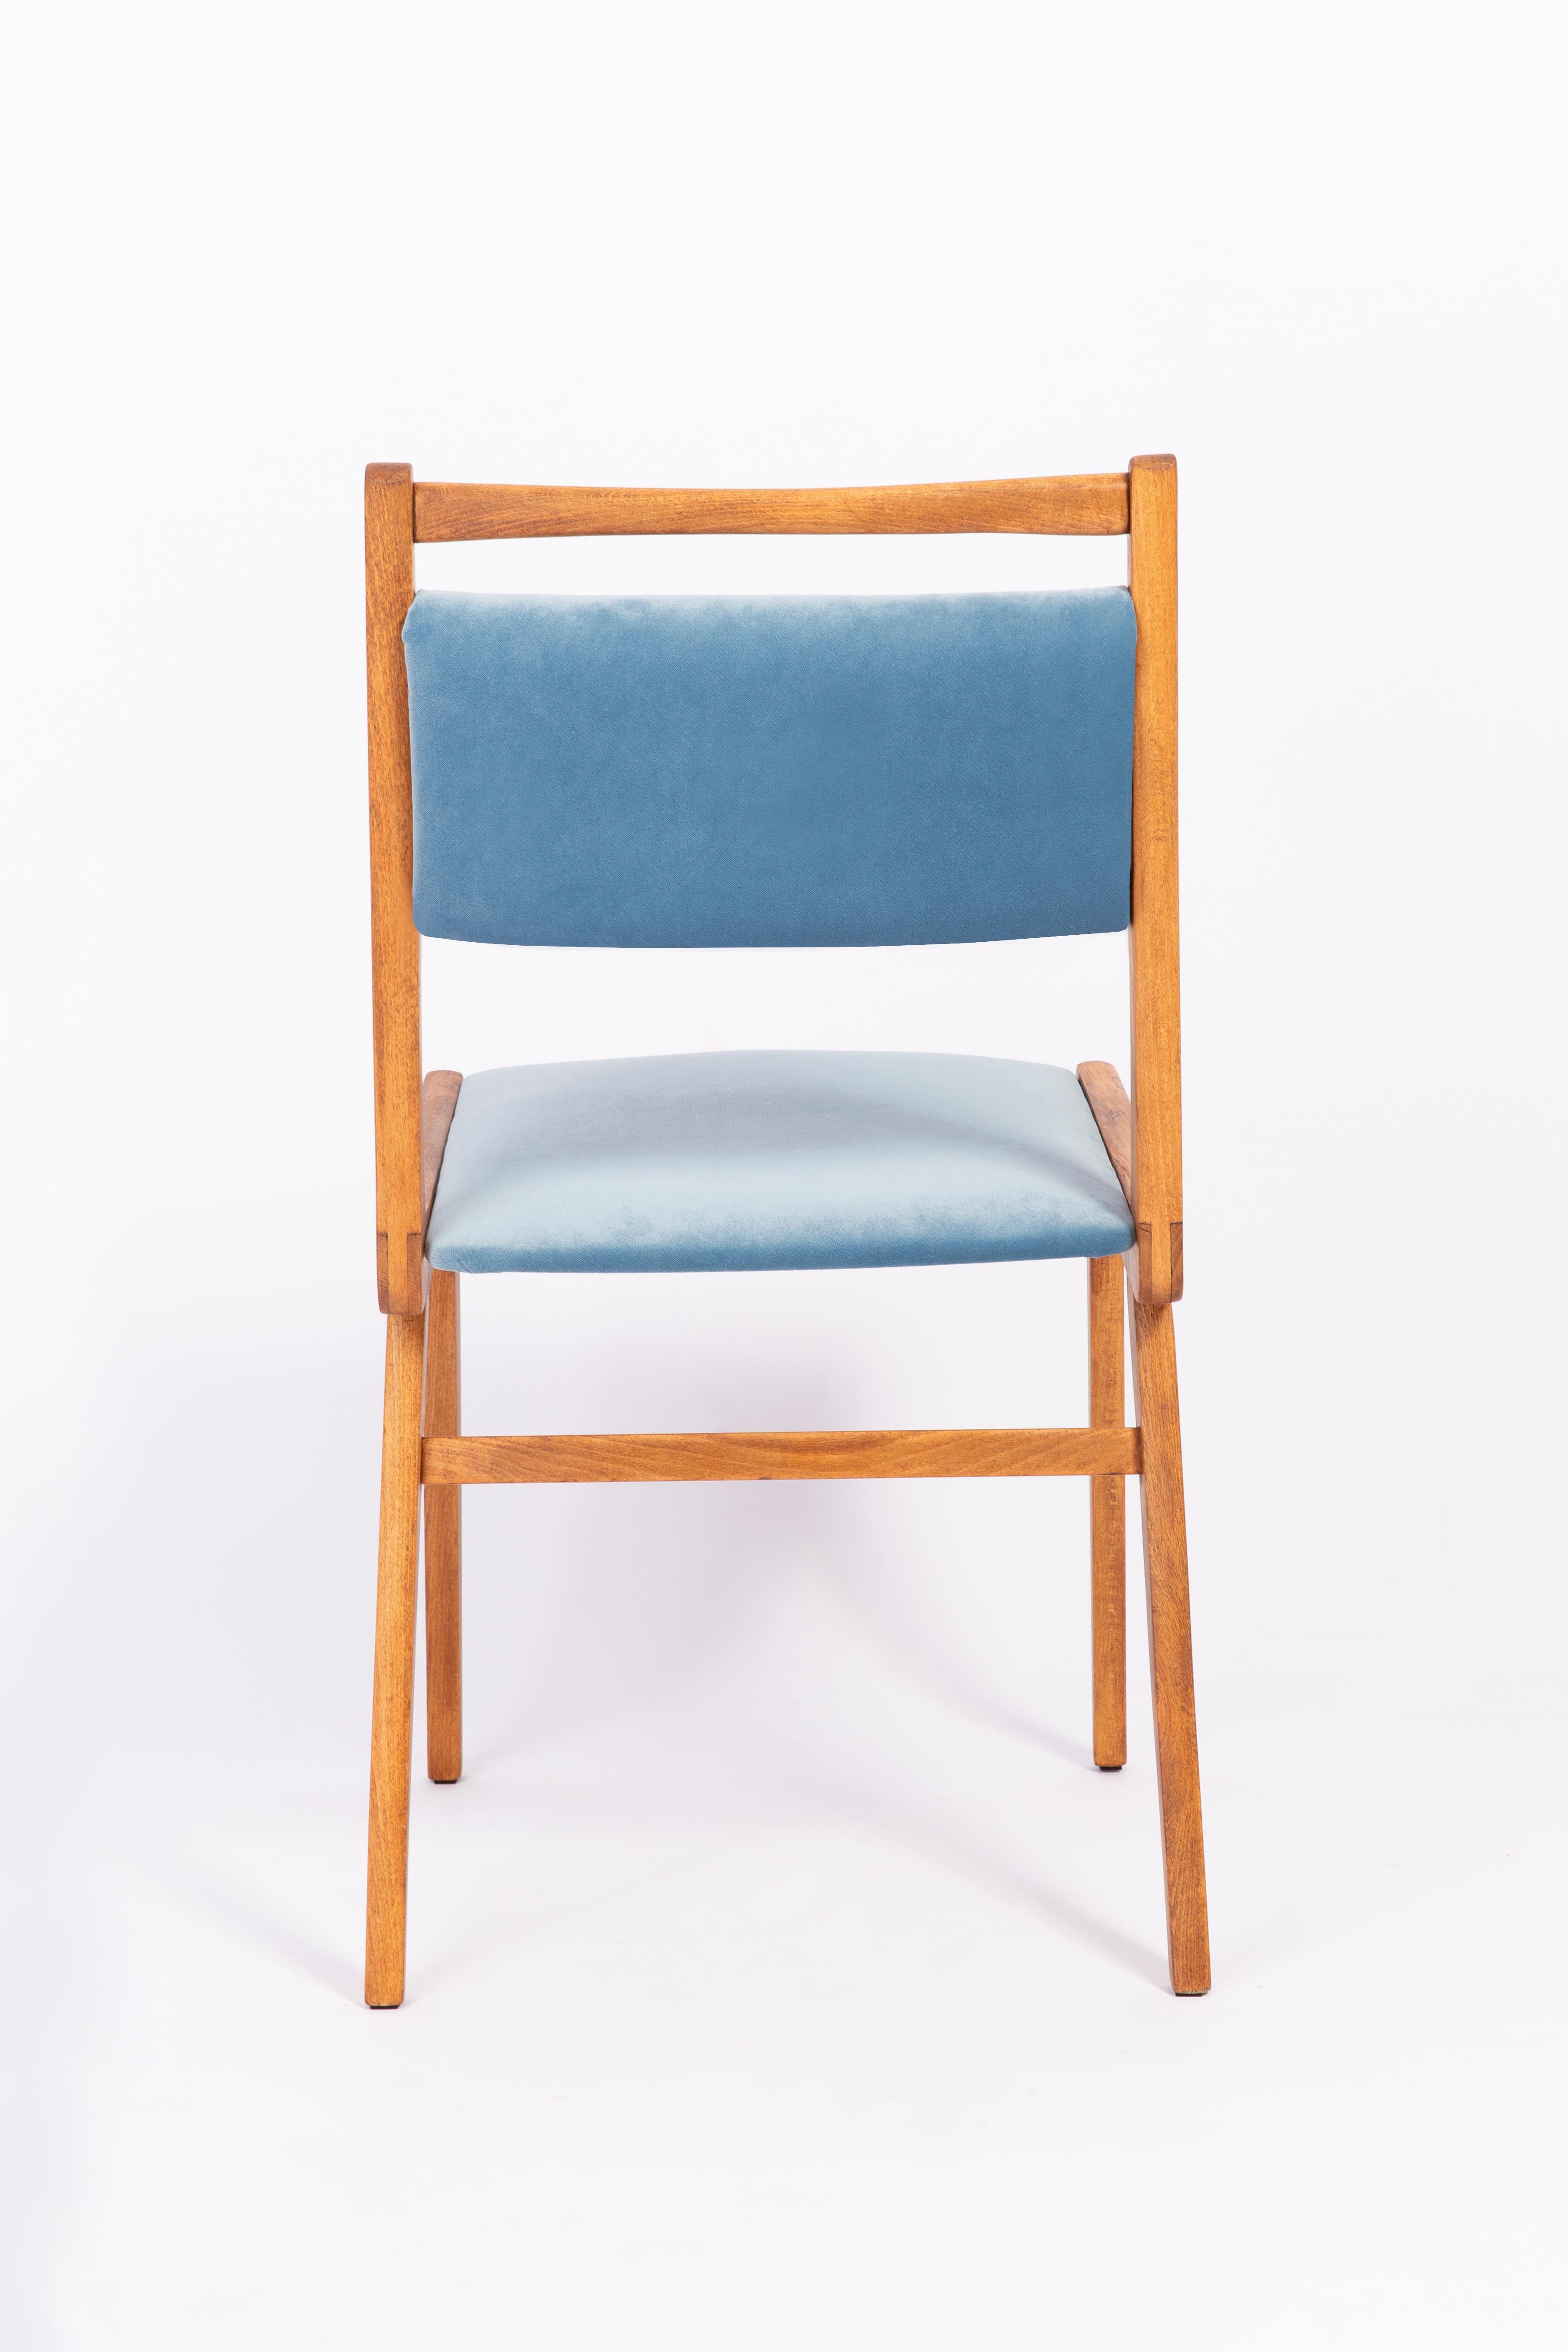 Set of Four 20th Century Blue Velvet Chairs, Poland, 1960s For Sale 4